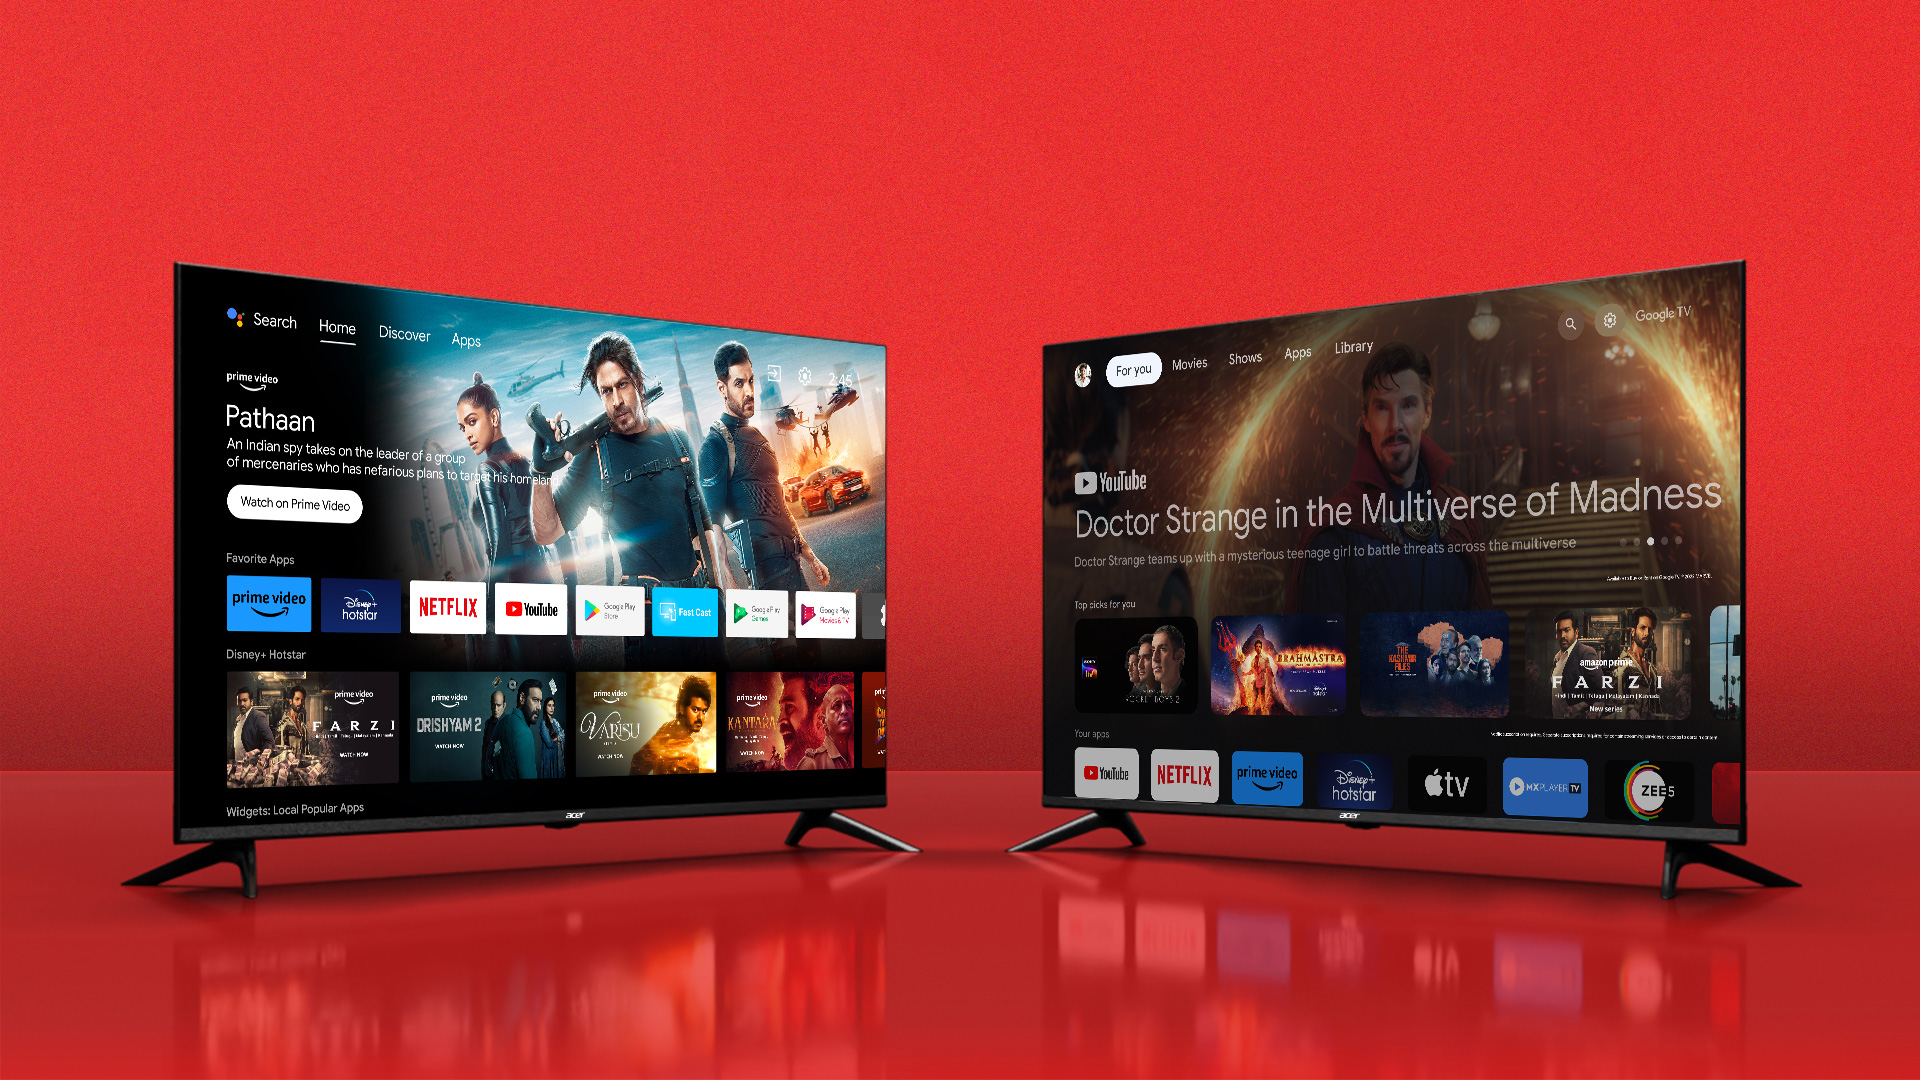 The Battle of TV Operating Systems: GOOGLE TV vs ANDROID TV